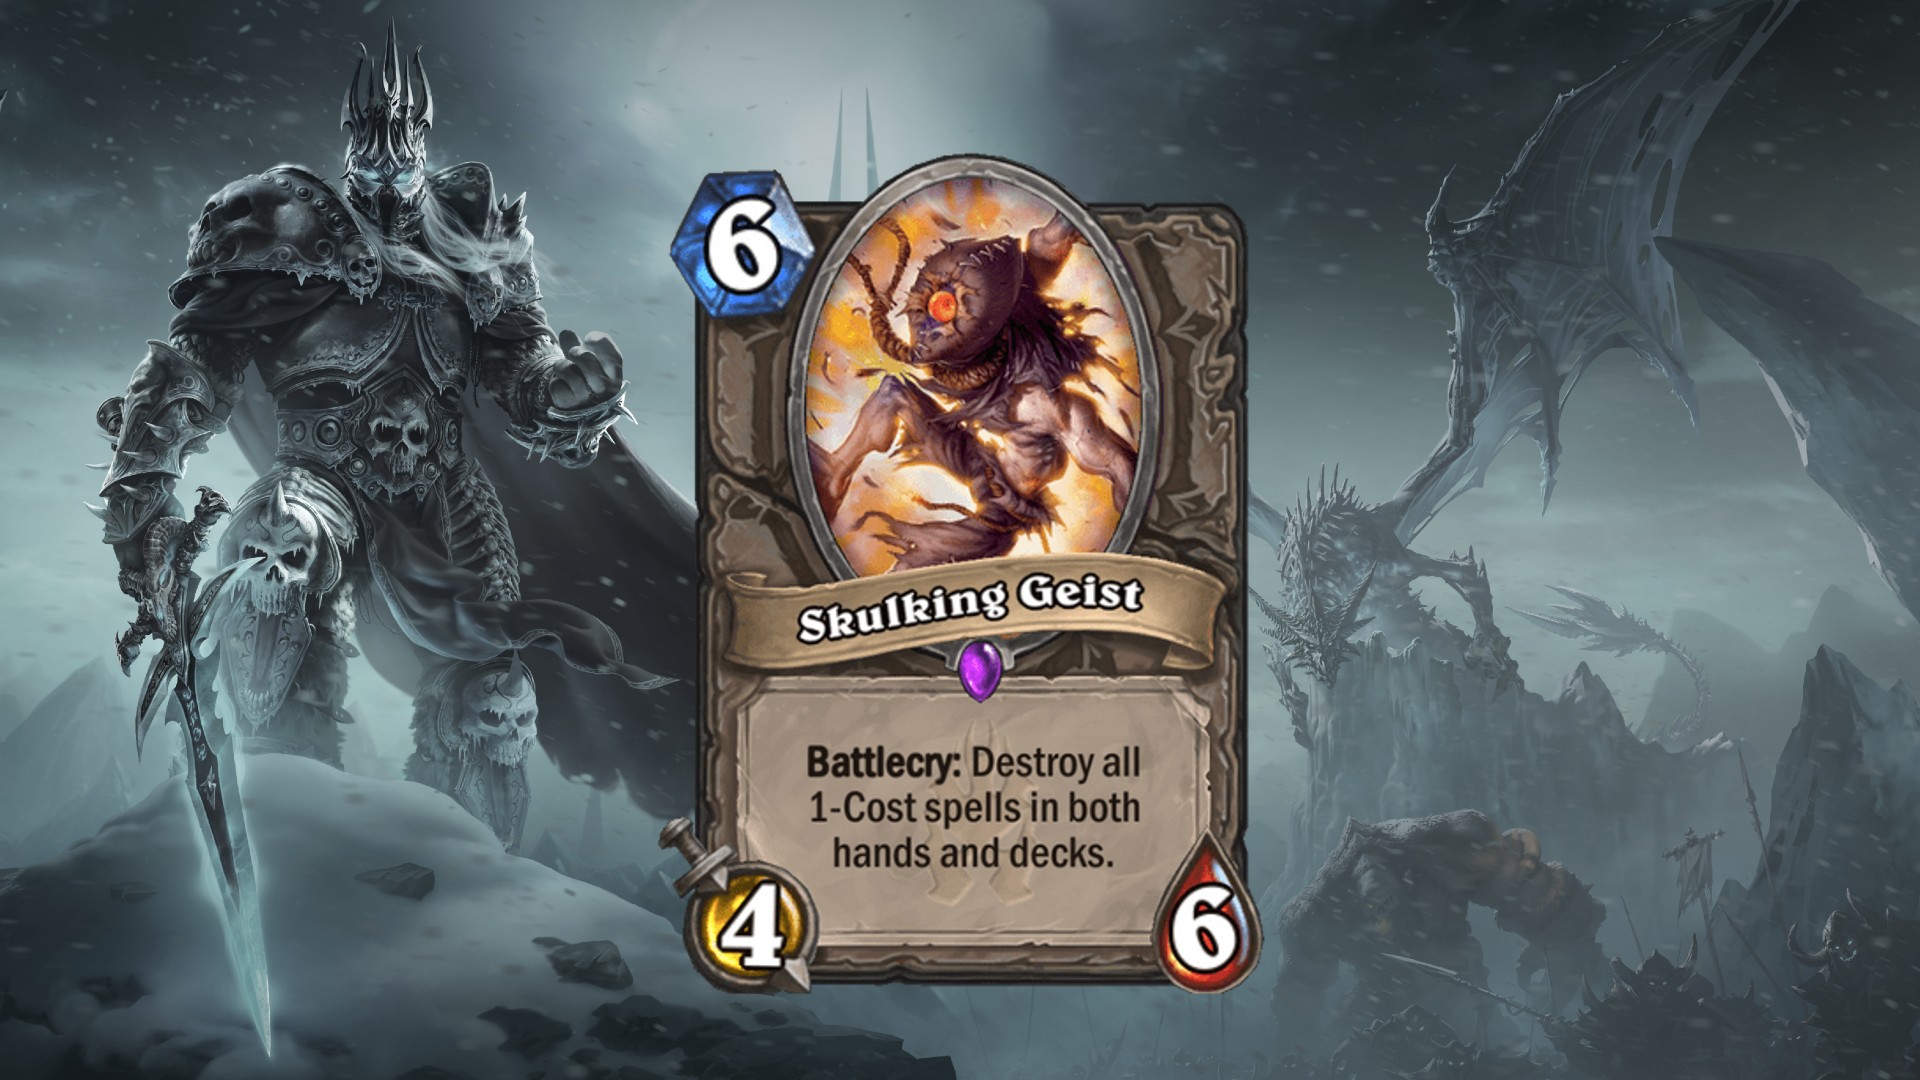 Card images and art from Hearthstone's  Knights of the Frozen Throne expansion.